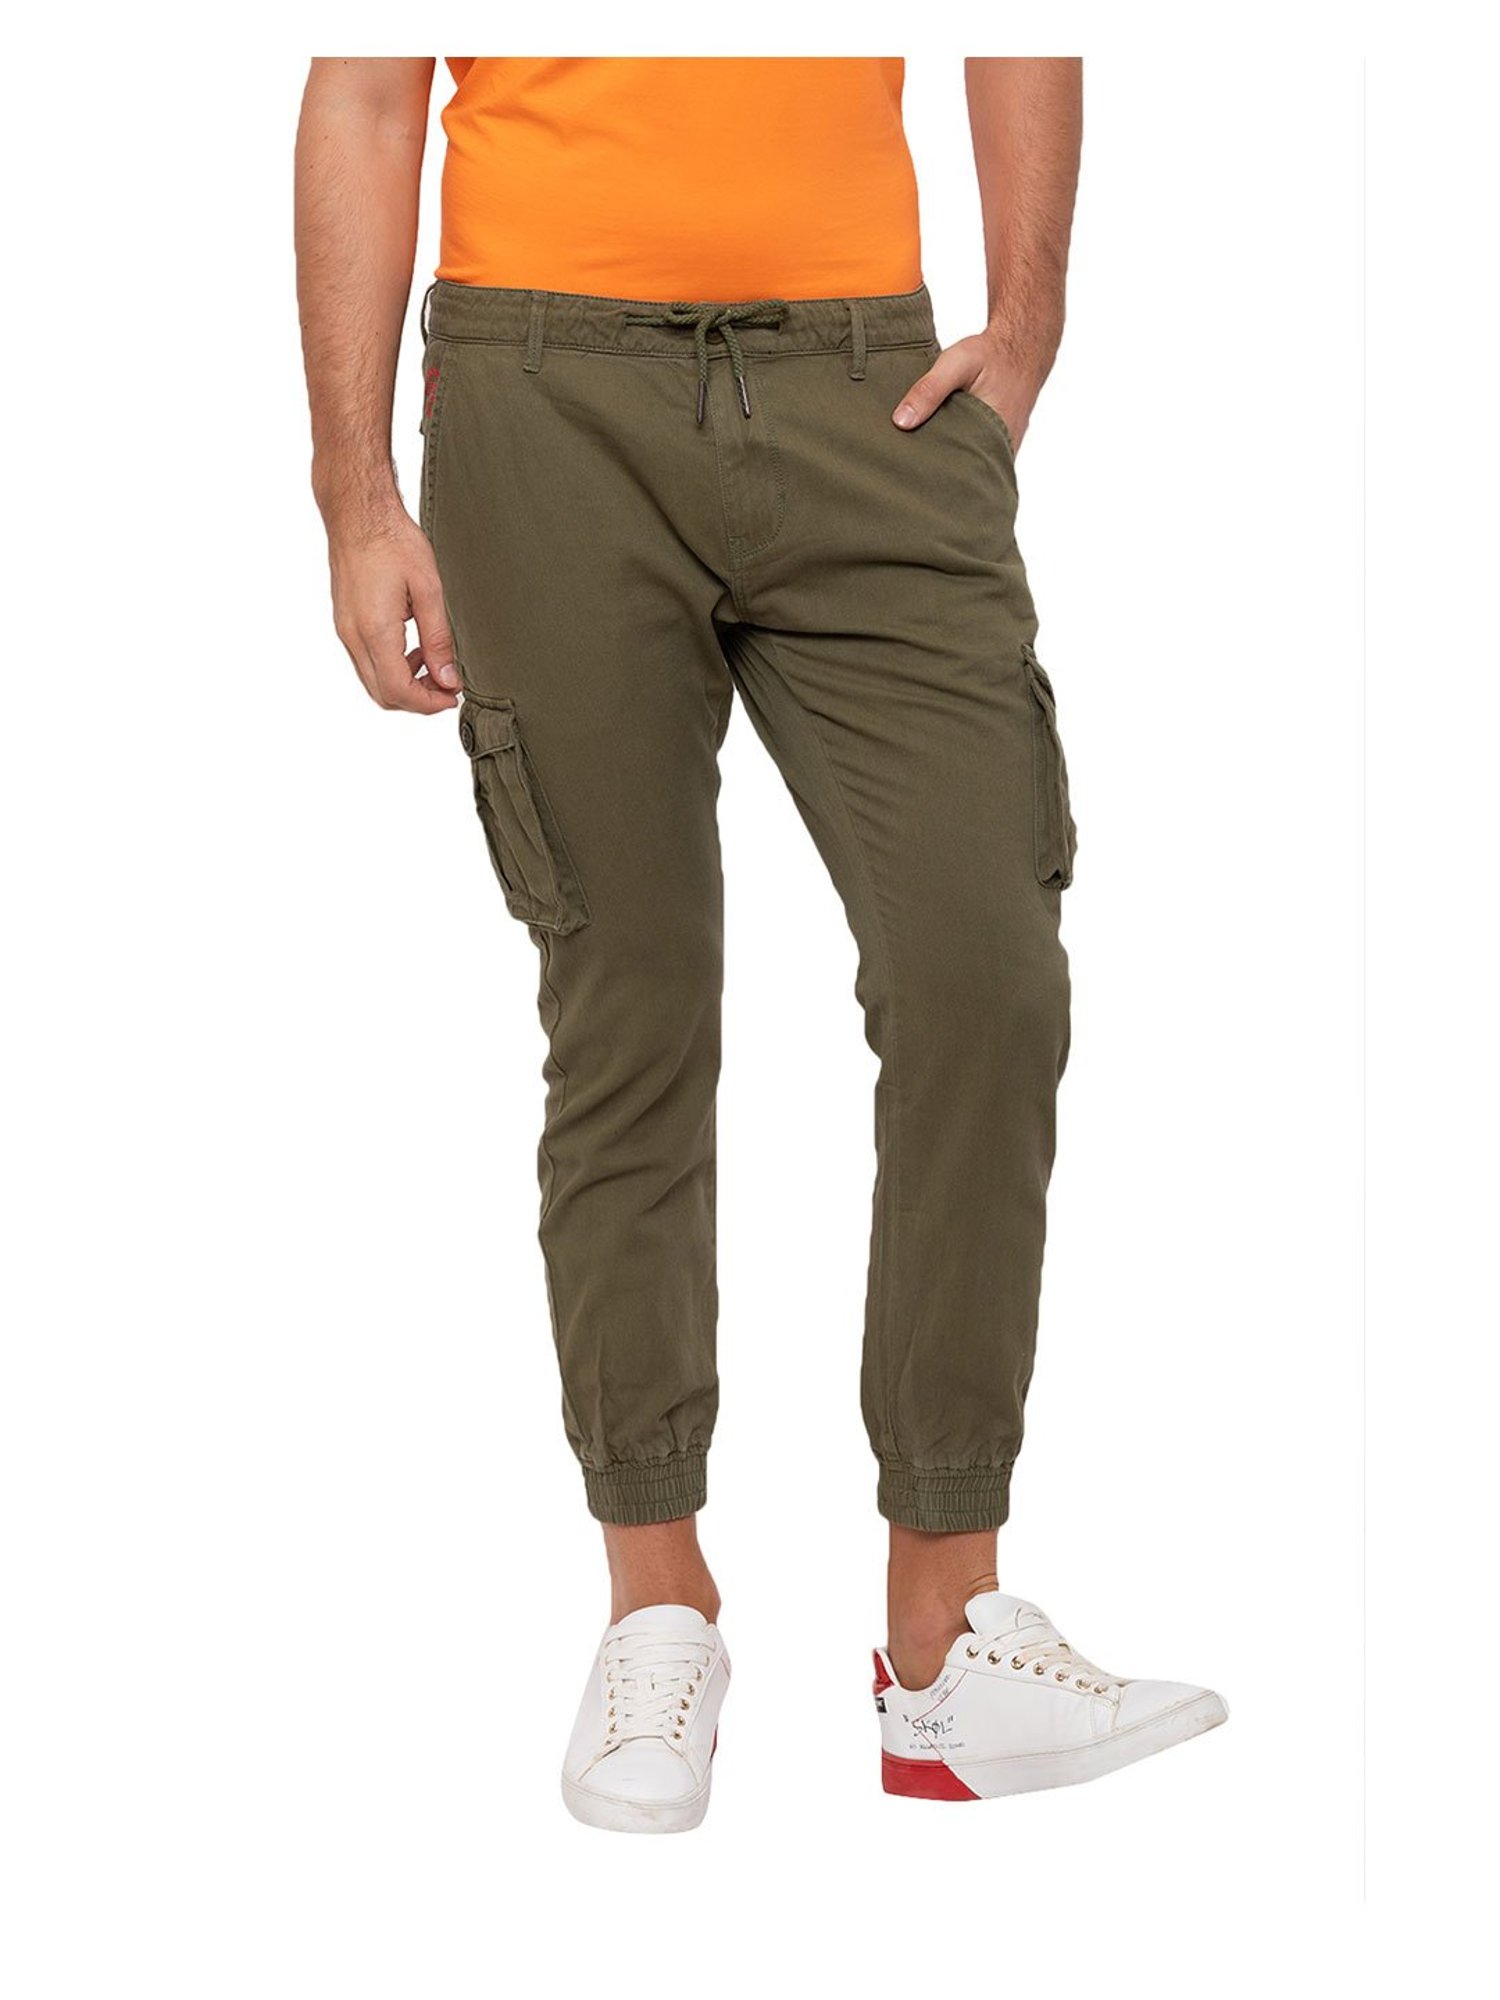 PAYPER MILITARY GREEN COTTON TWILL TROUSERS  HomeMart